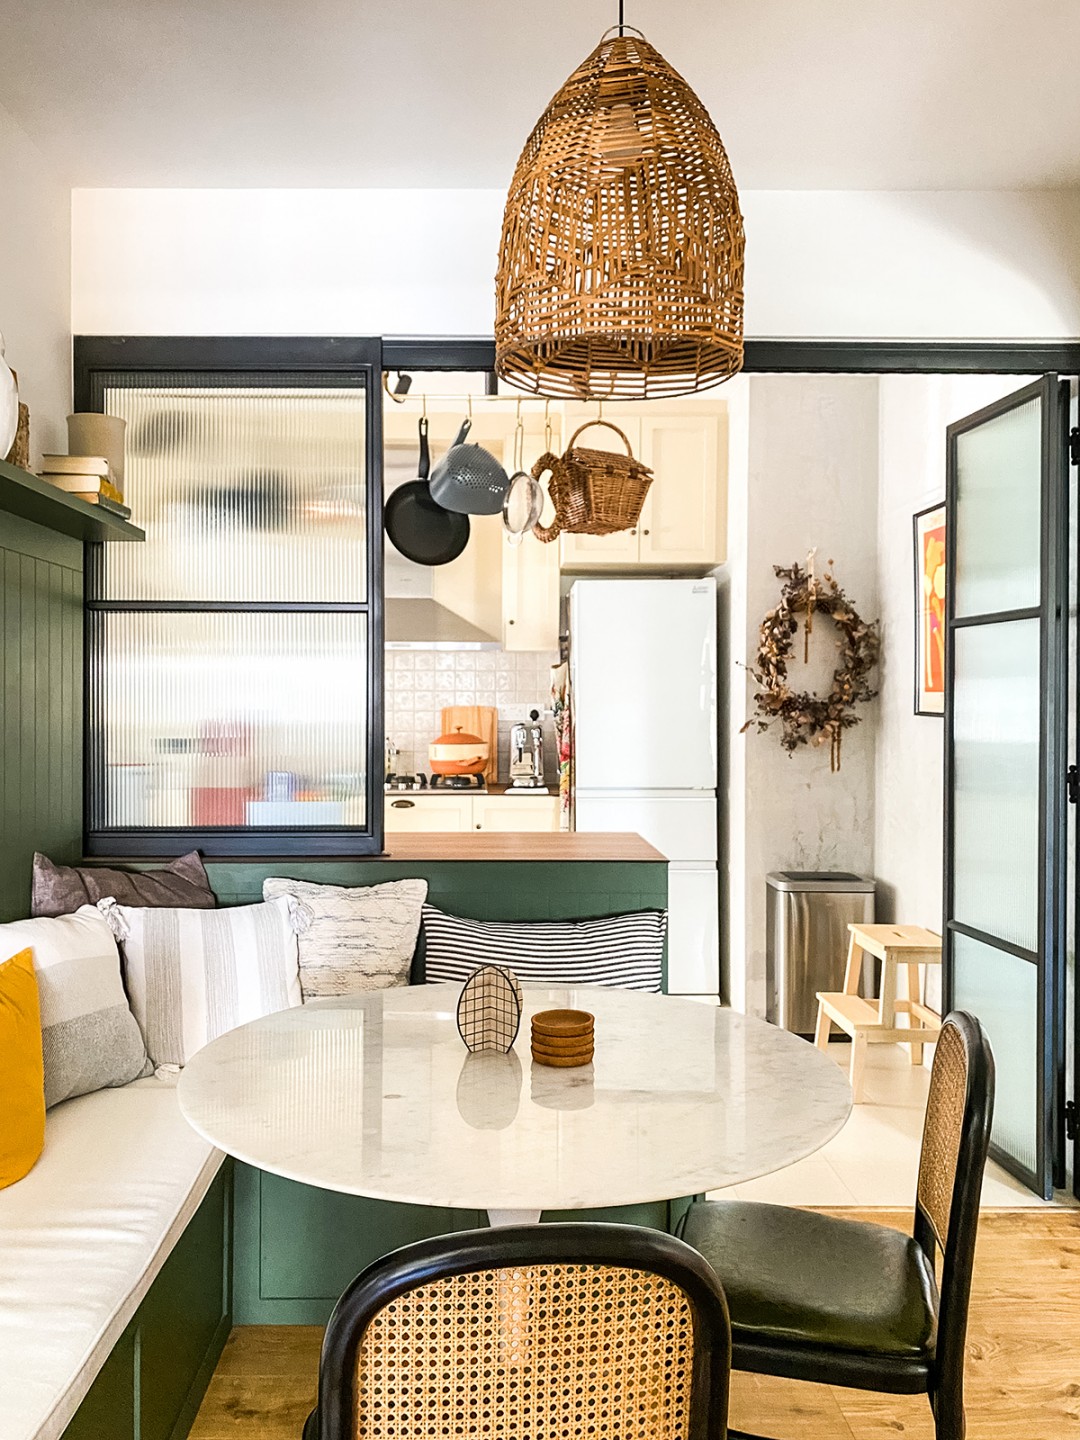 squarerooms cnbrr home fazlie corinne instagram bto flat account hdb homeowners interview singapore canberra mediterranean inspired design apartment style kitchen rustic traditional cream beige cabinets old retro charm green dinette benches glass door